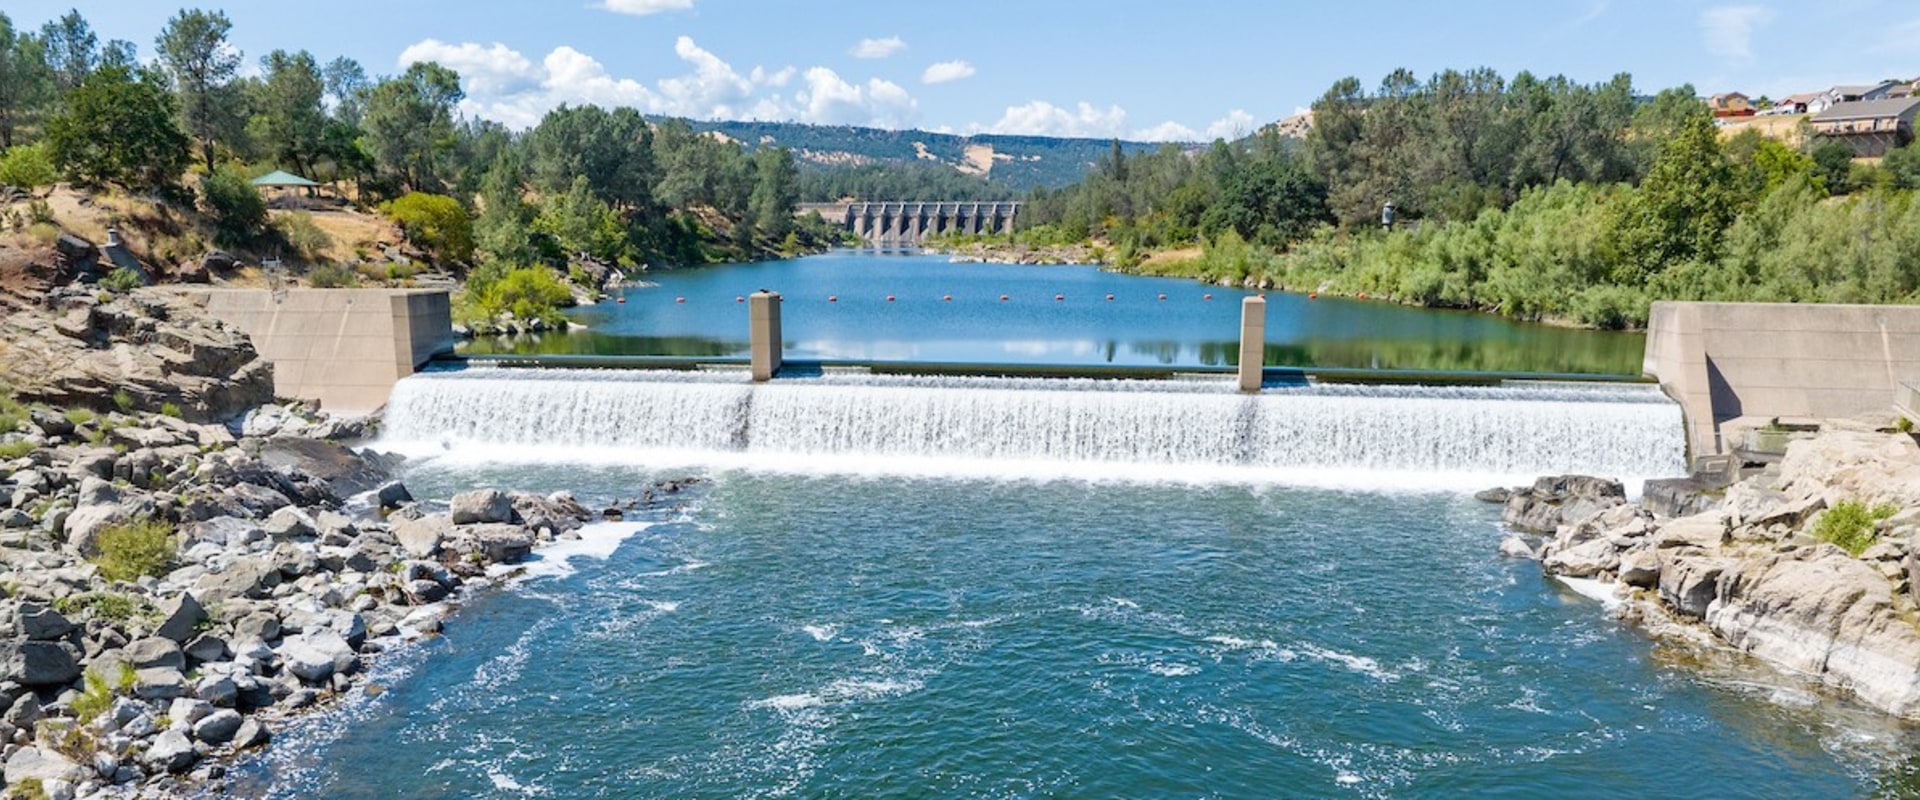 Updates and Revisions to the Feather River Stewardship Coalition Charter